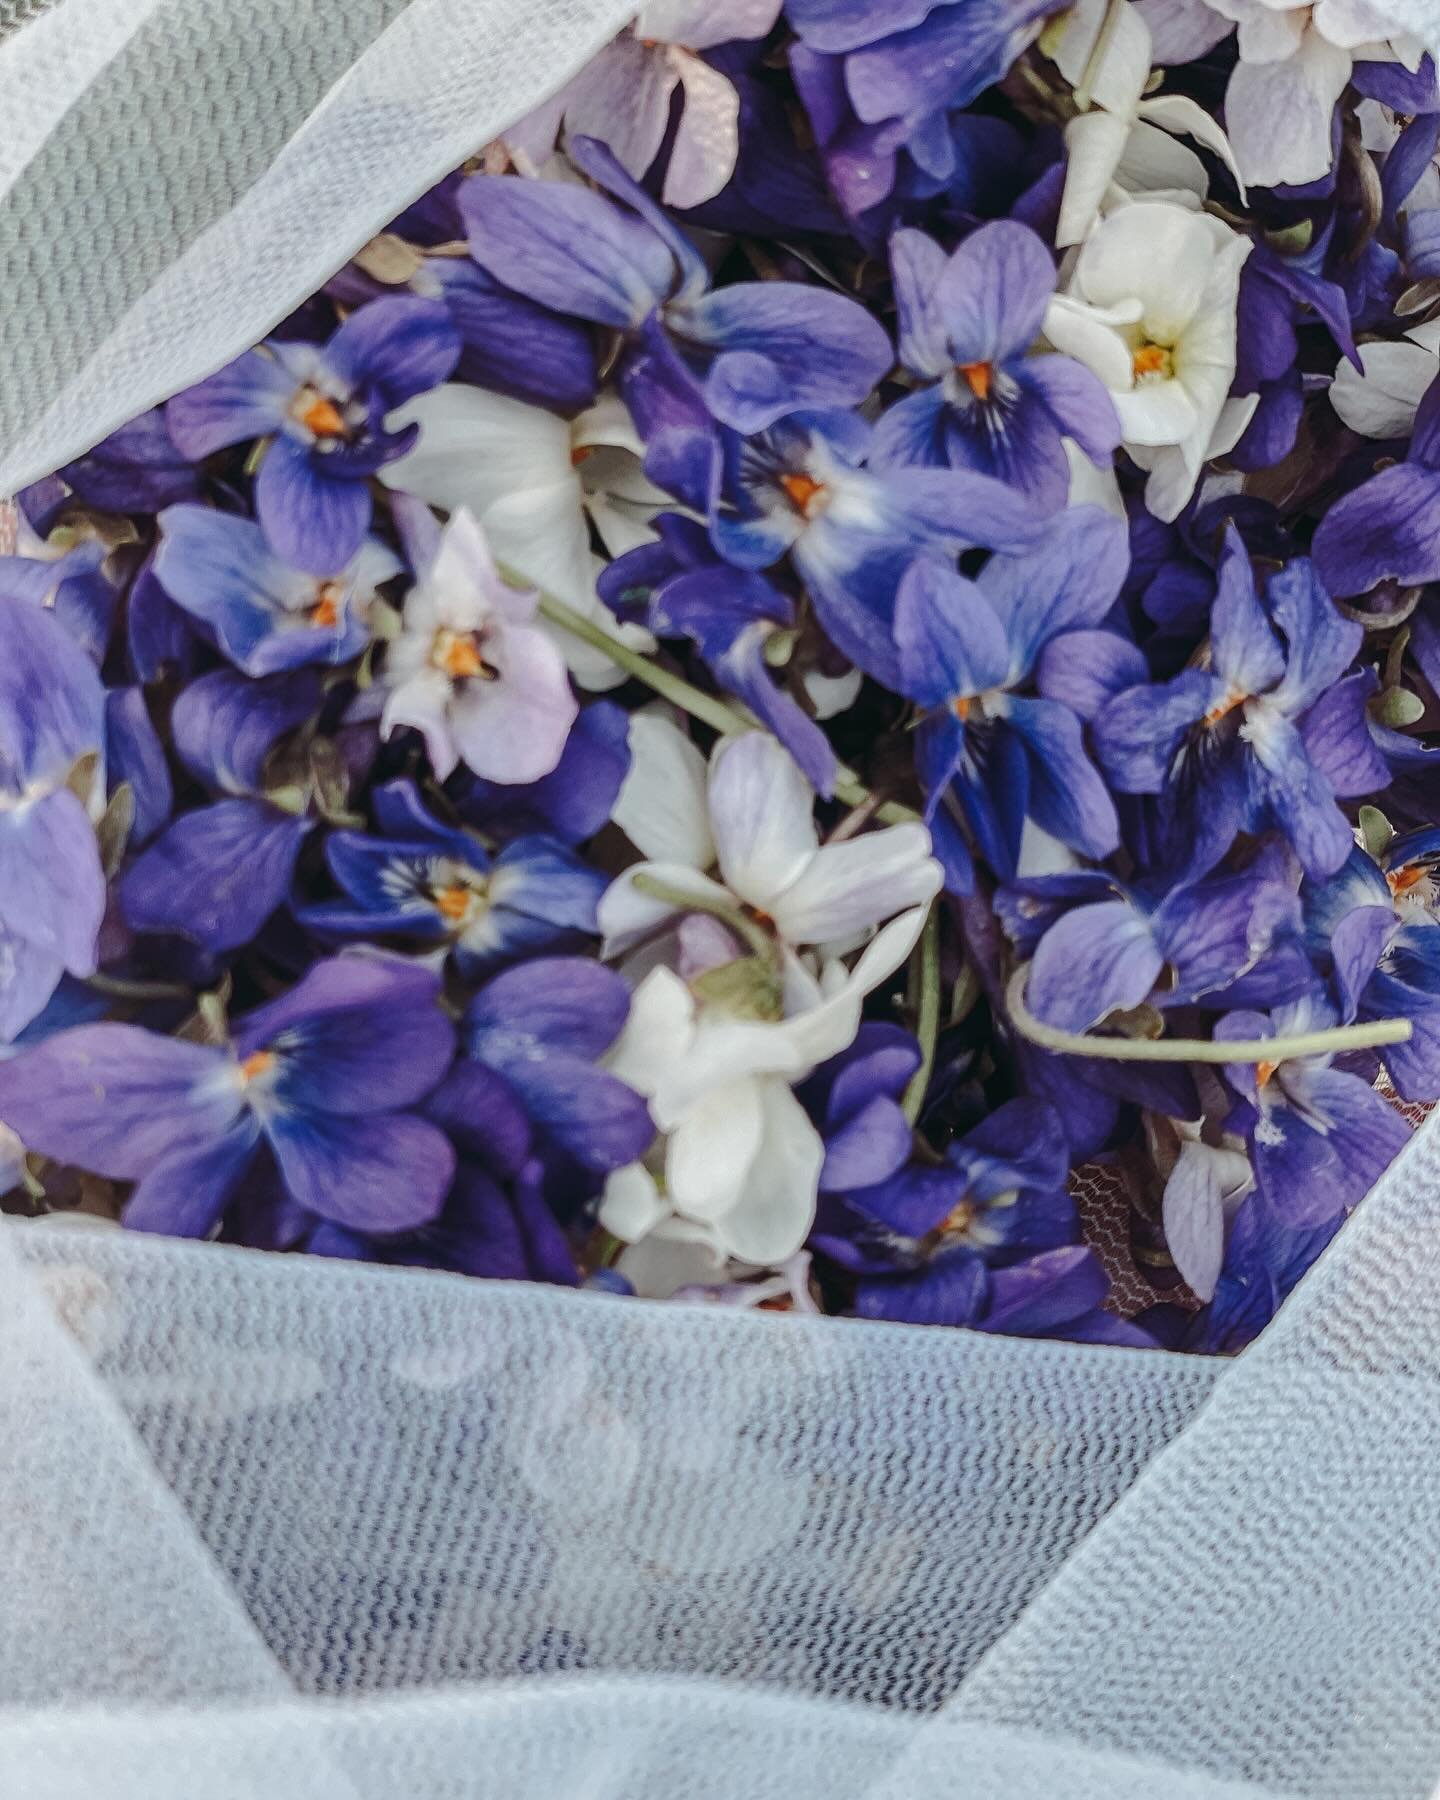 Sweet violet delights

One of my favourite spring pastimes is spotting the first shy sweet violet flowers hiding in the hedgerows and along grassy embankments

Not only are these vibrant little flowers edible but they are also 

Soothing and calming 